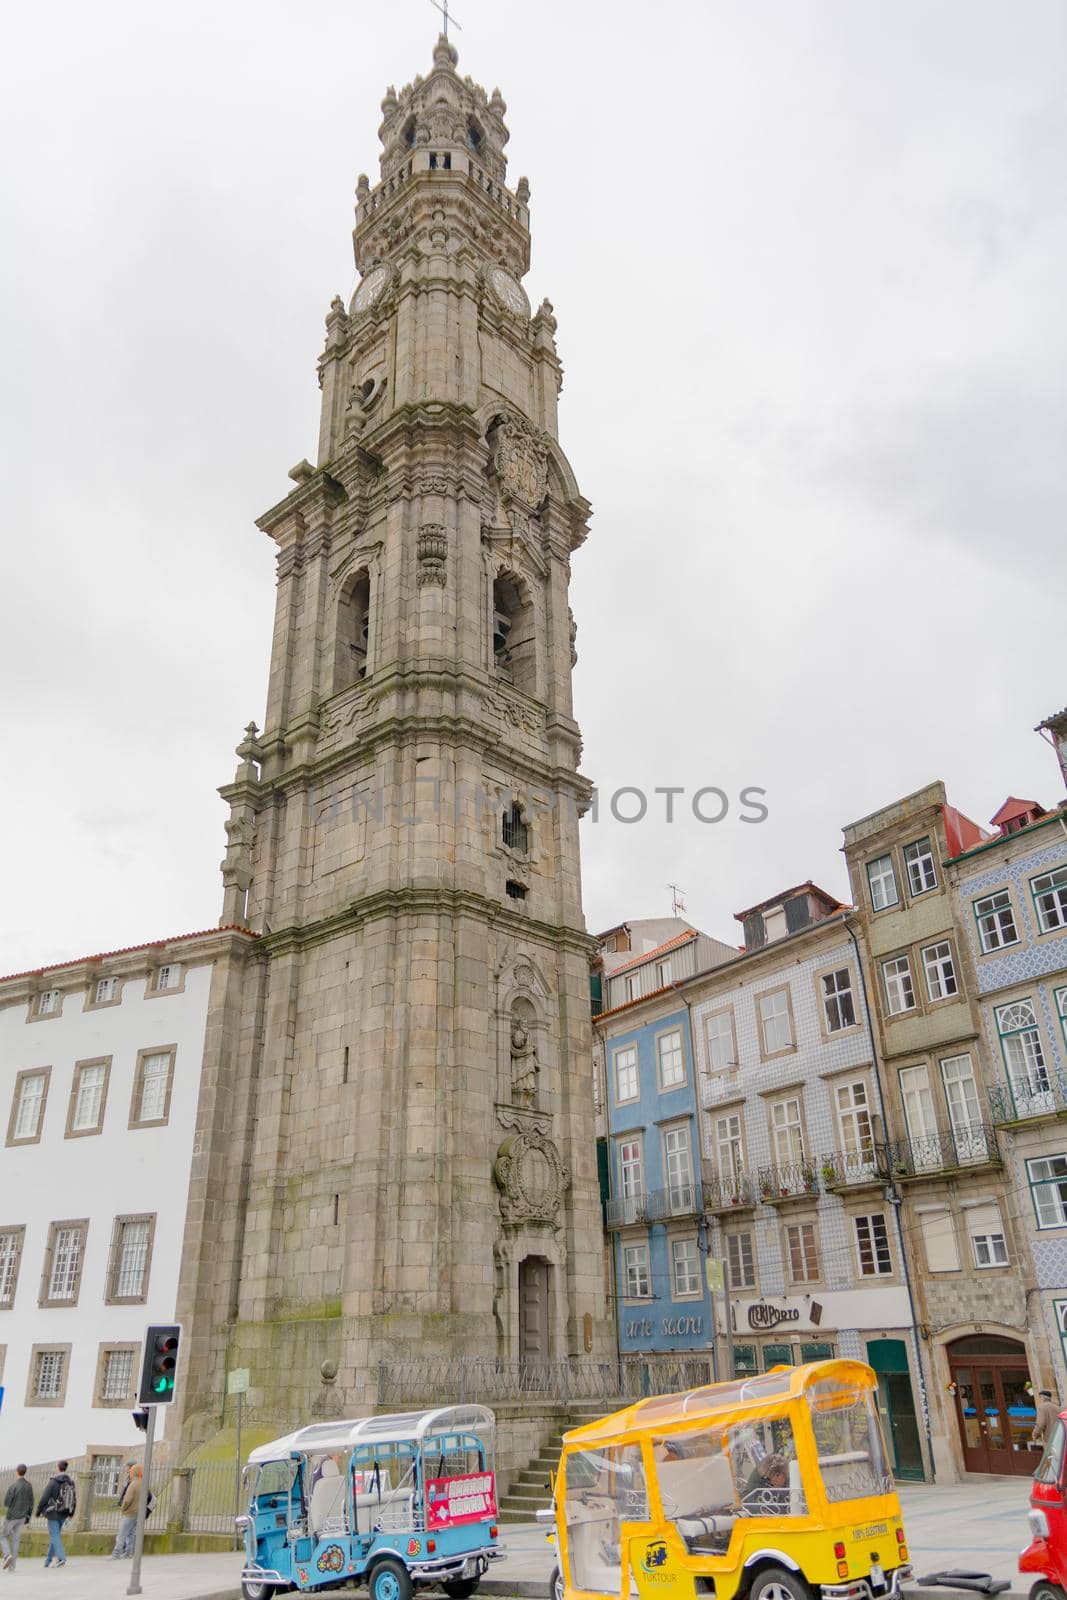 Porto,Portugal; 12/06/2016 : View of the beautiful baroque Church of Clerigos (Igreja dos Clerigos, in Portuguese) and iconic Clerigos Tower, one of the landmarks and symbols of Oporto city in Portugal. Sunset color in blue sky.